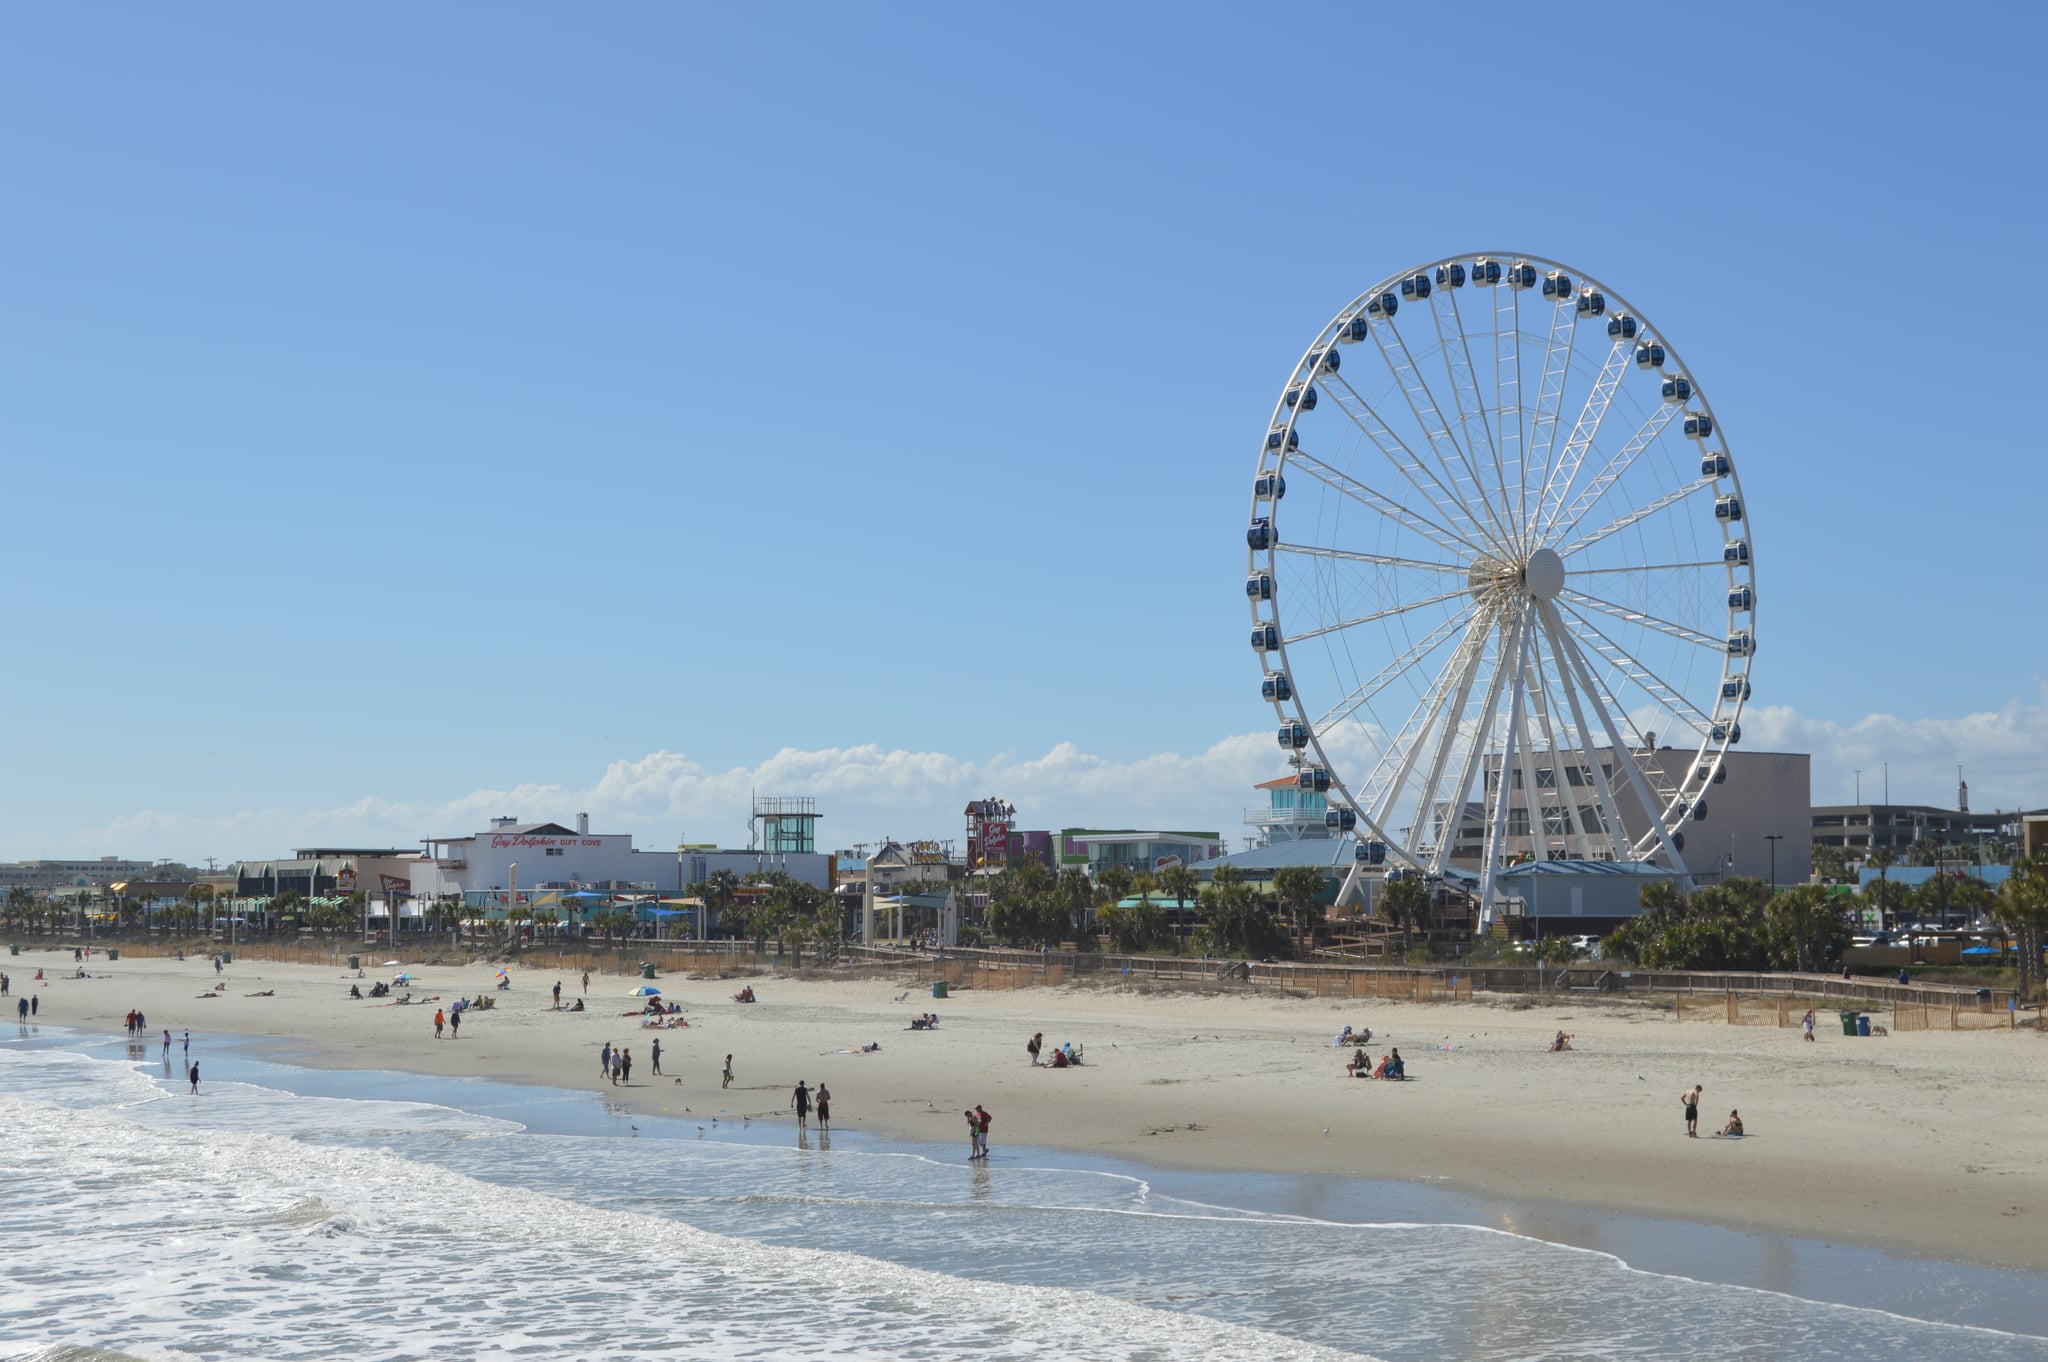 Skywheel Myrtle Beach In Myrtle Beach Sc 15 Sensory Friendly Family Attractions In The Us You And Your Little Ones Will Love Popsugar Family Photo 7